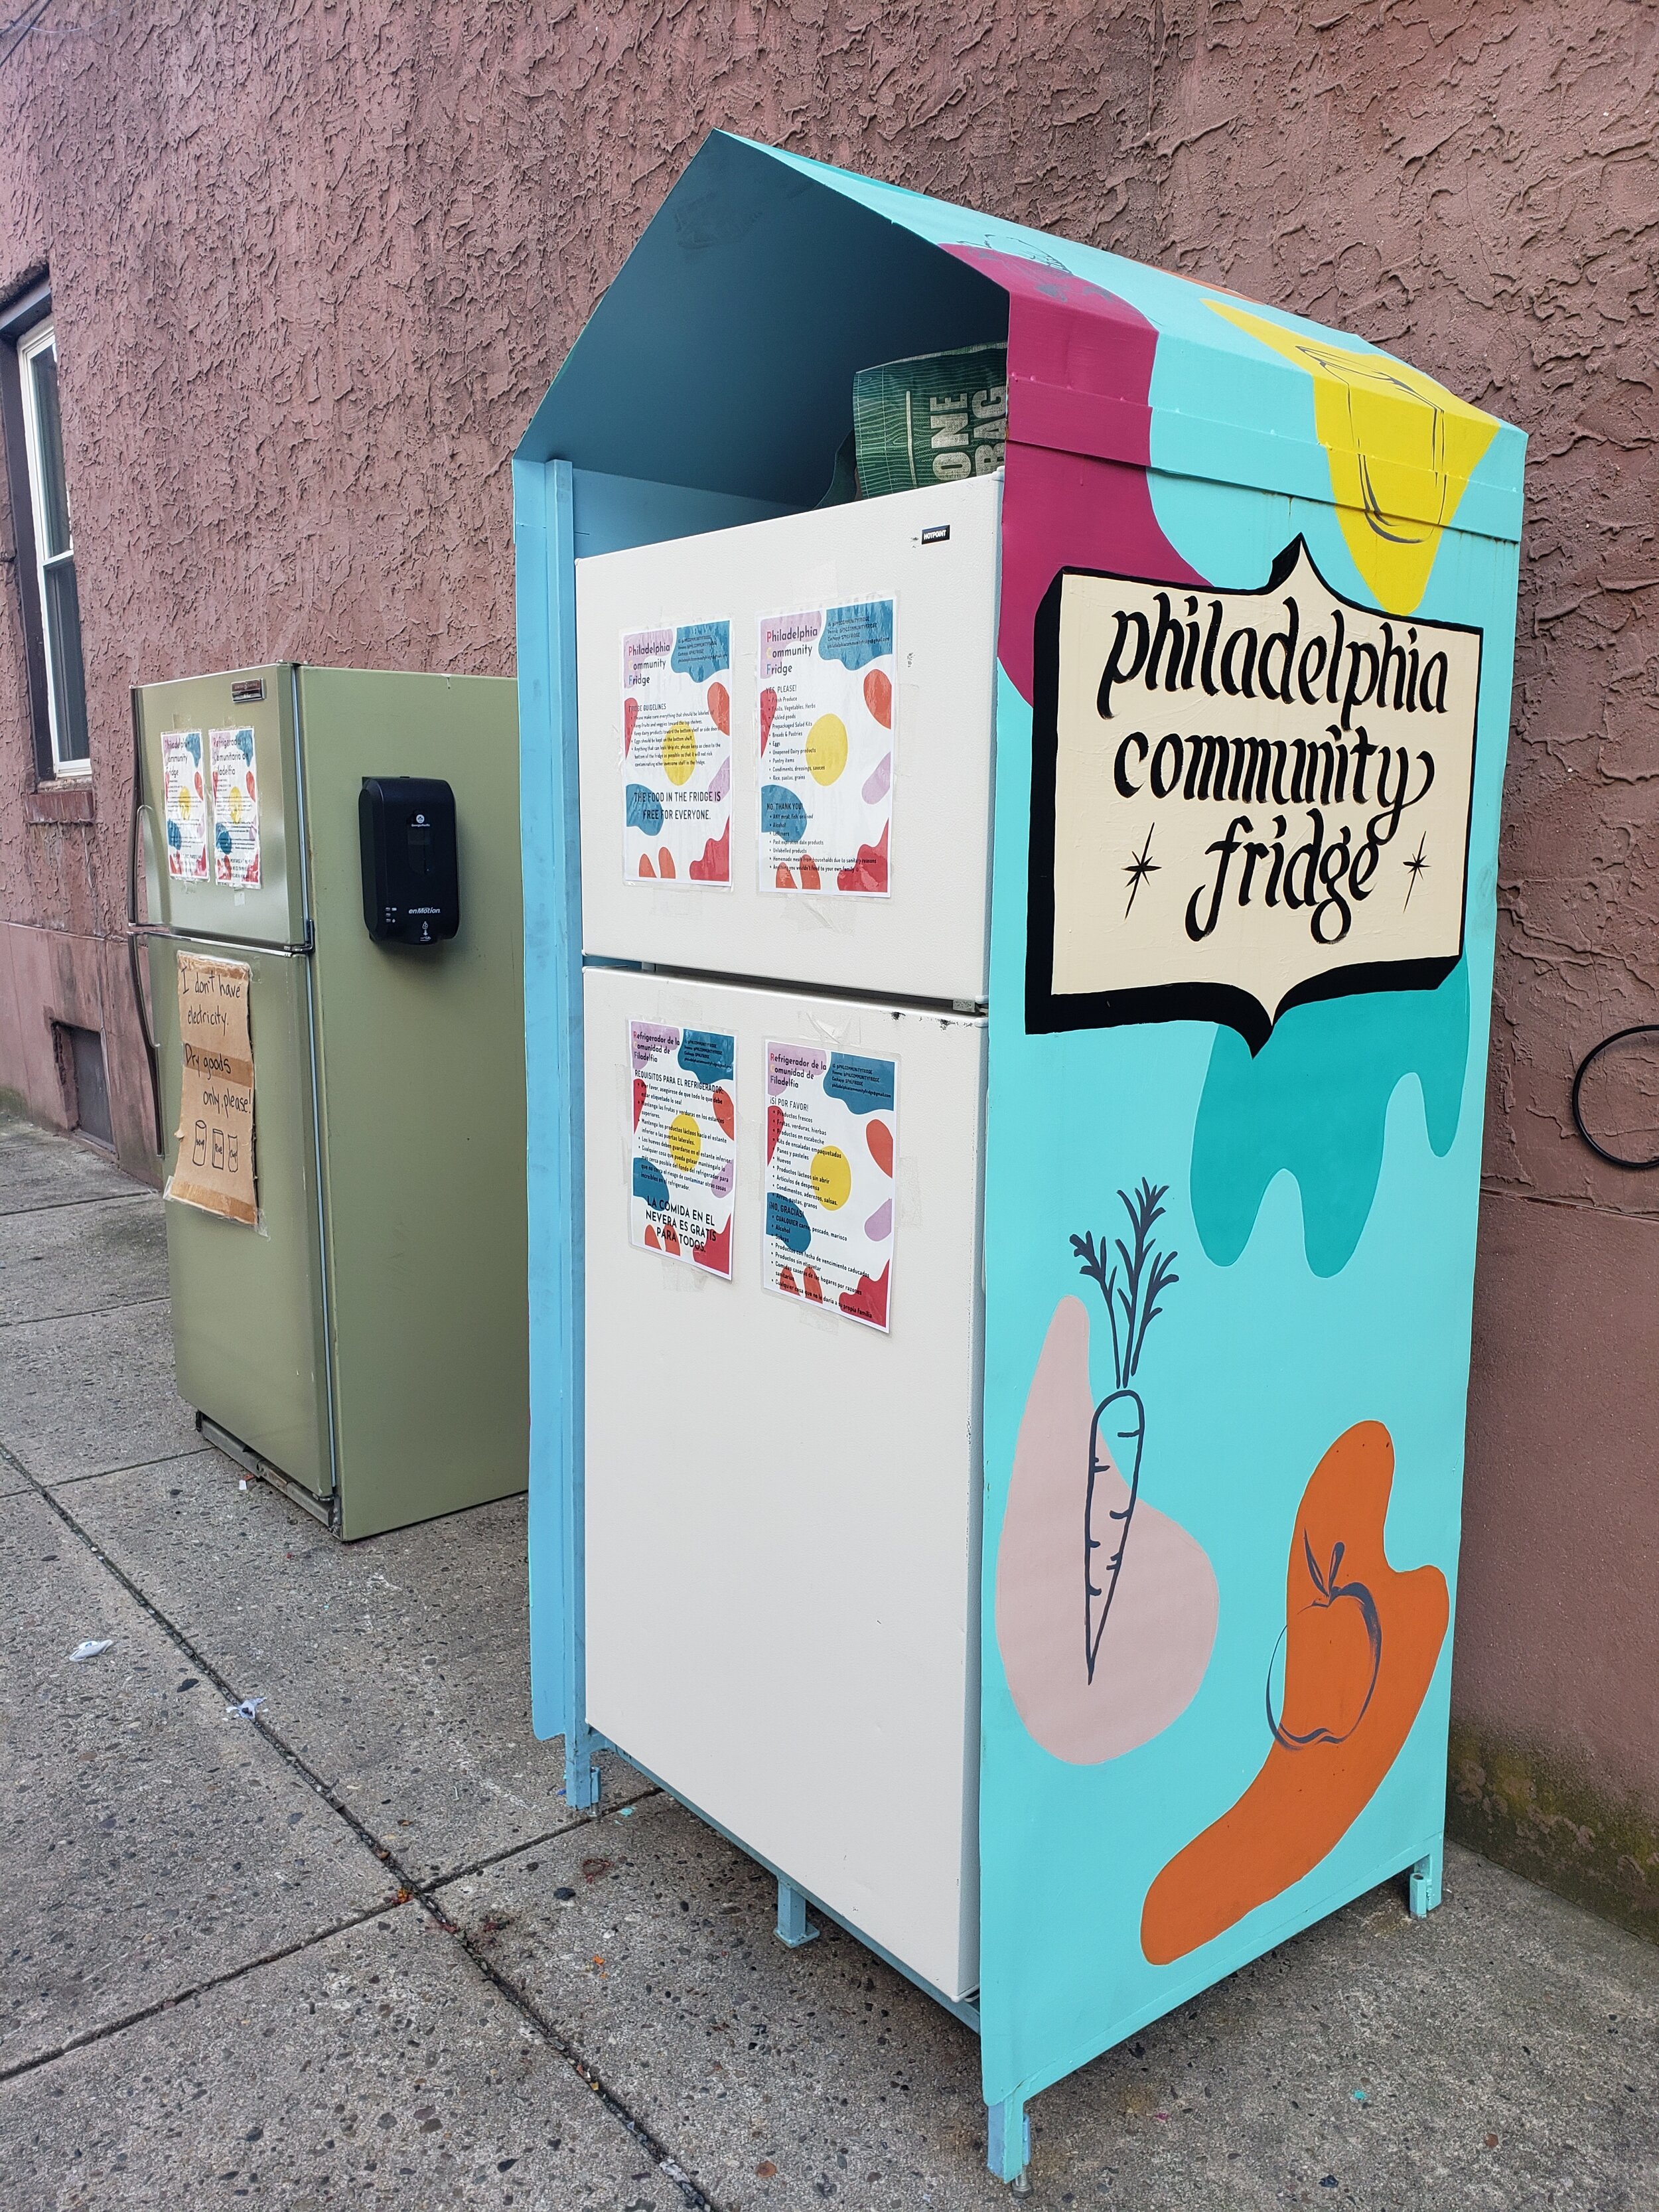 A community fridge located by the Bok building in South Philadelphia.